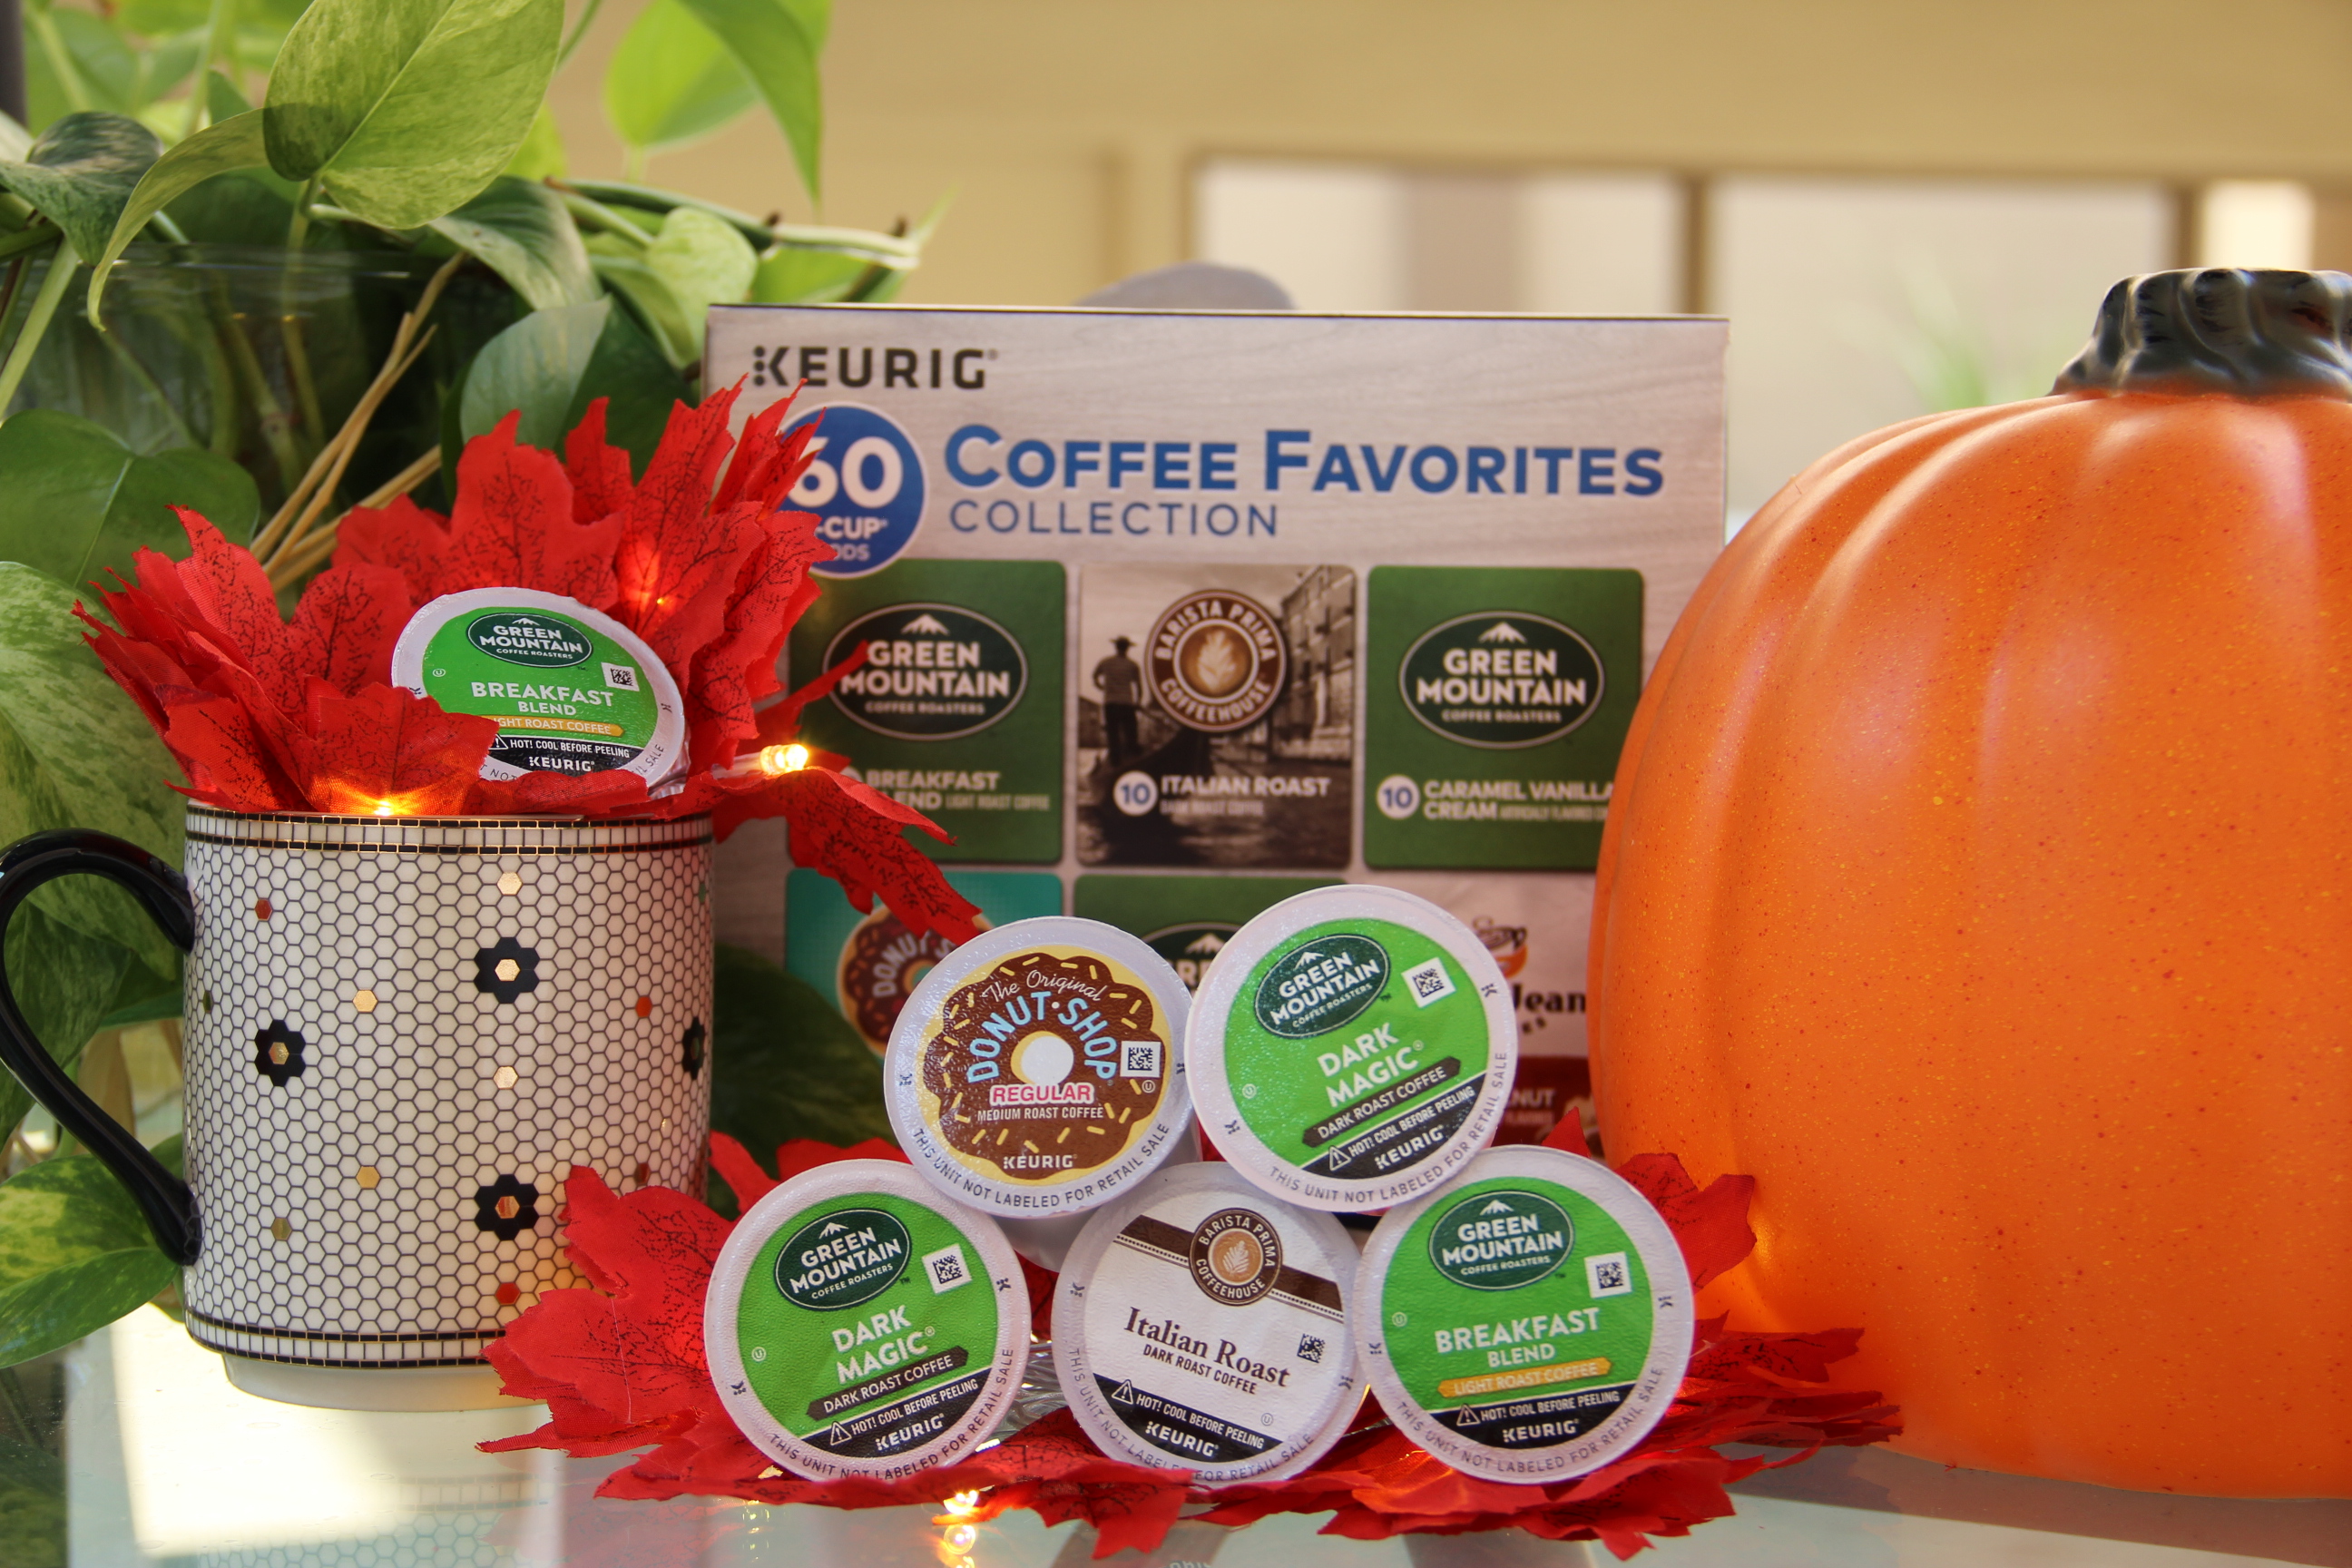 keurig, green mountain coffee, bed bath and beyond